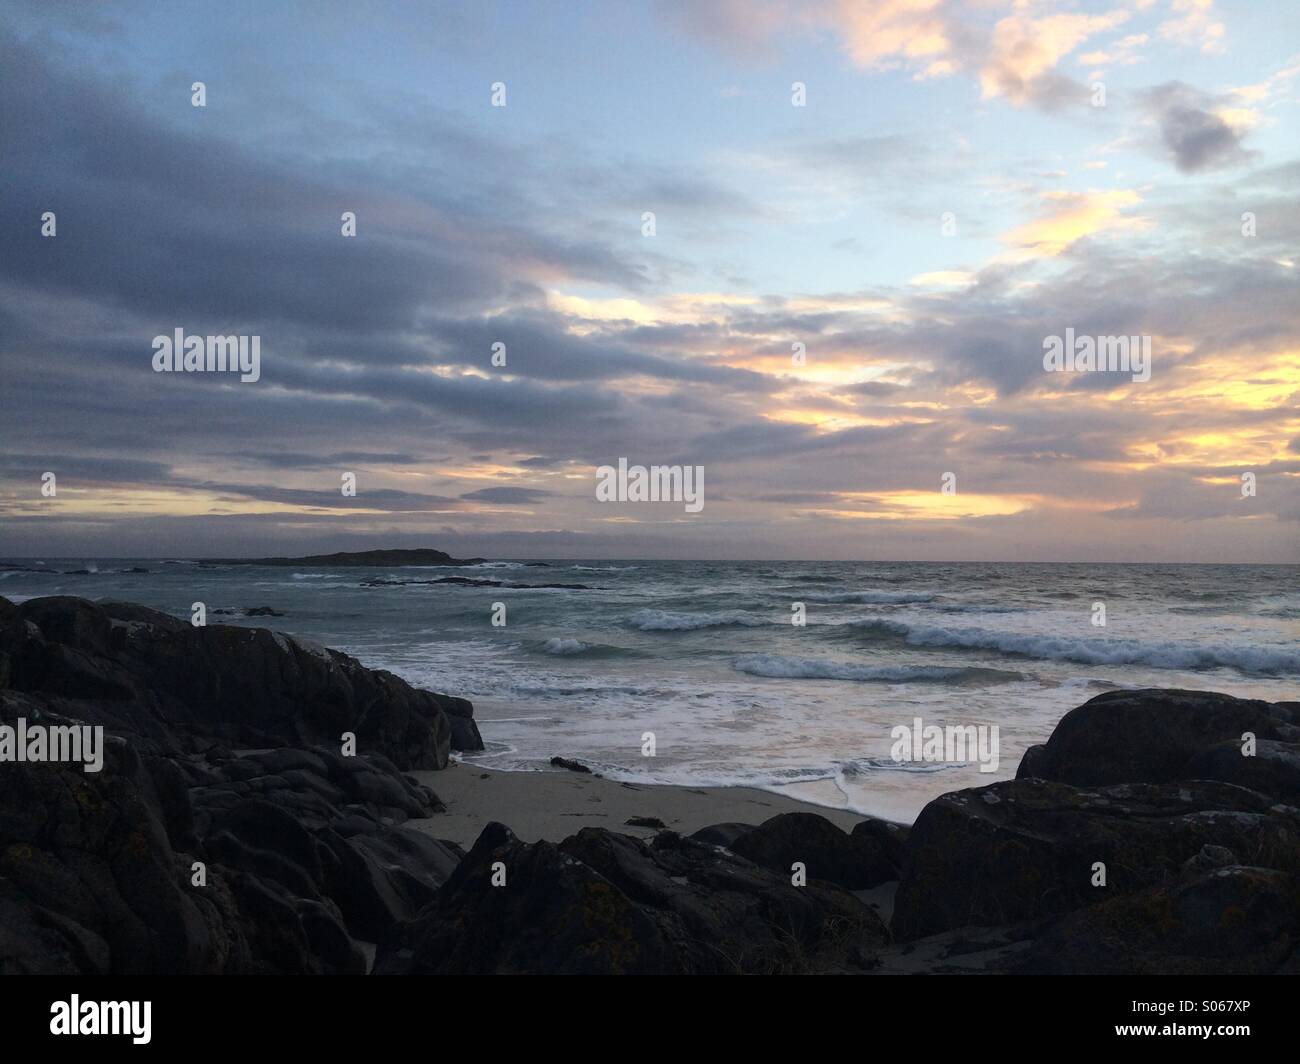 Sunset over stormy sea Stock Photo